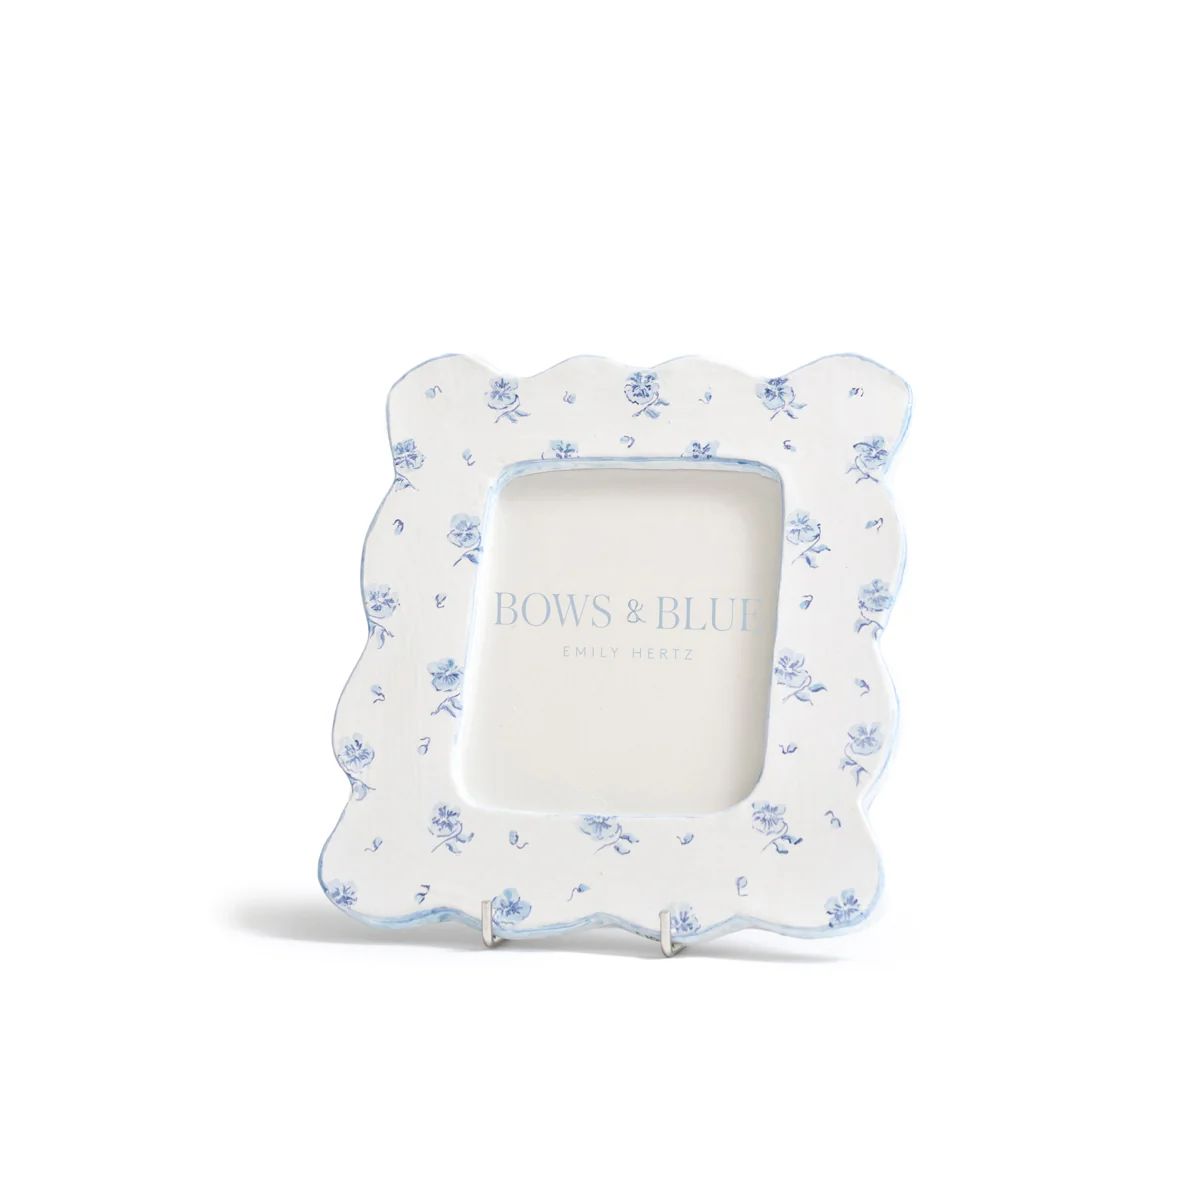 Scalloped Floral Picture Frame | Bows & Blue